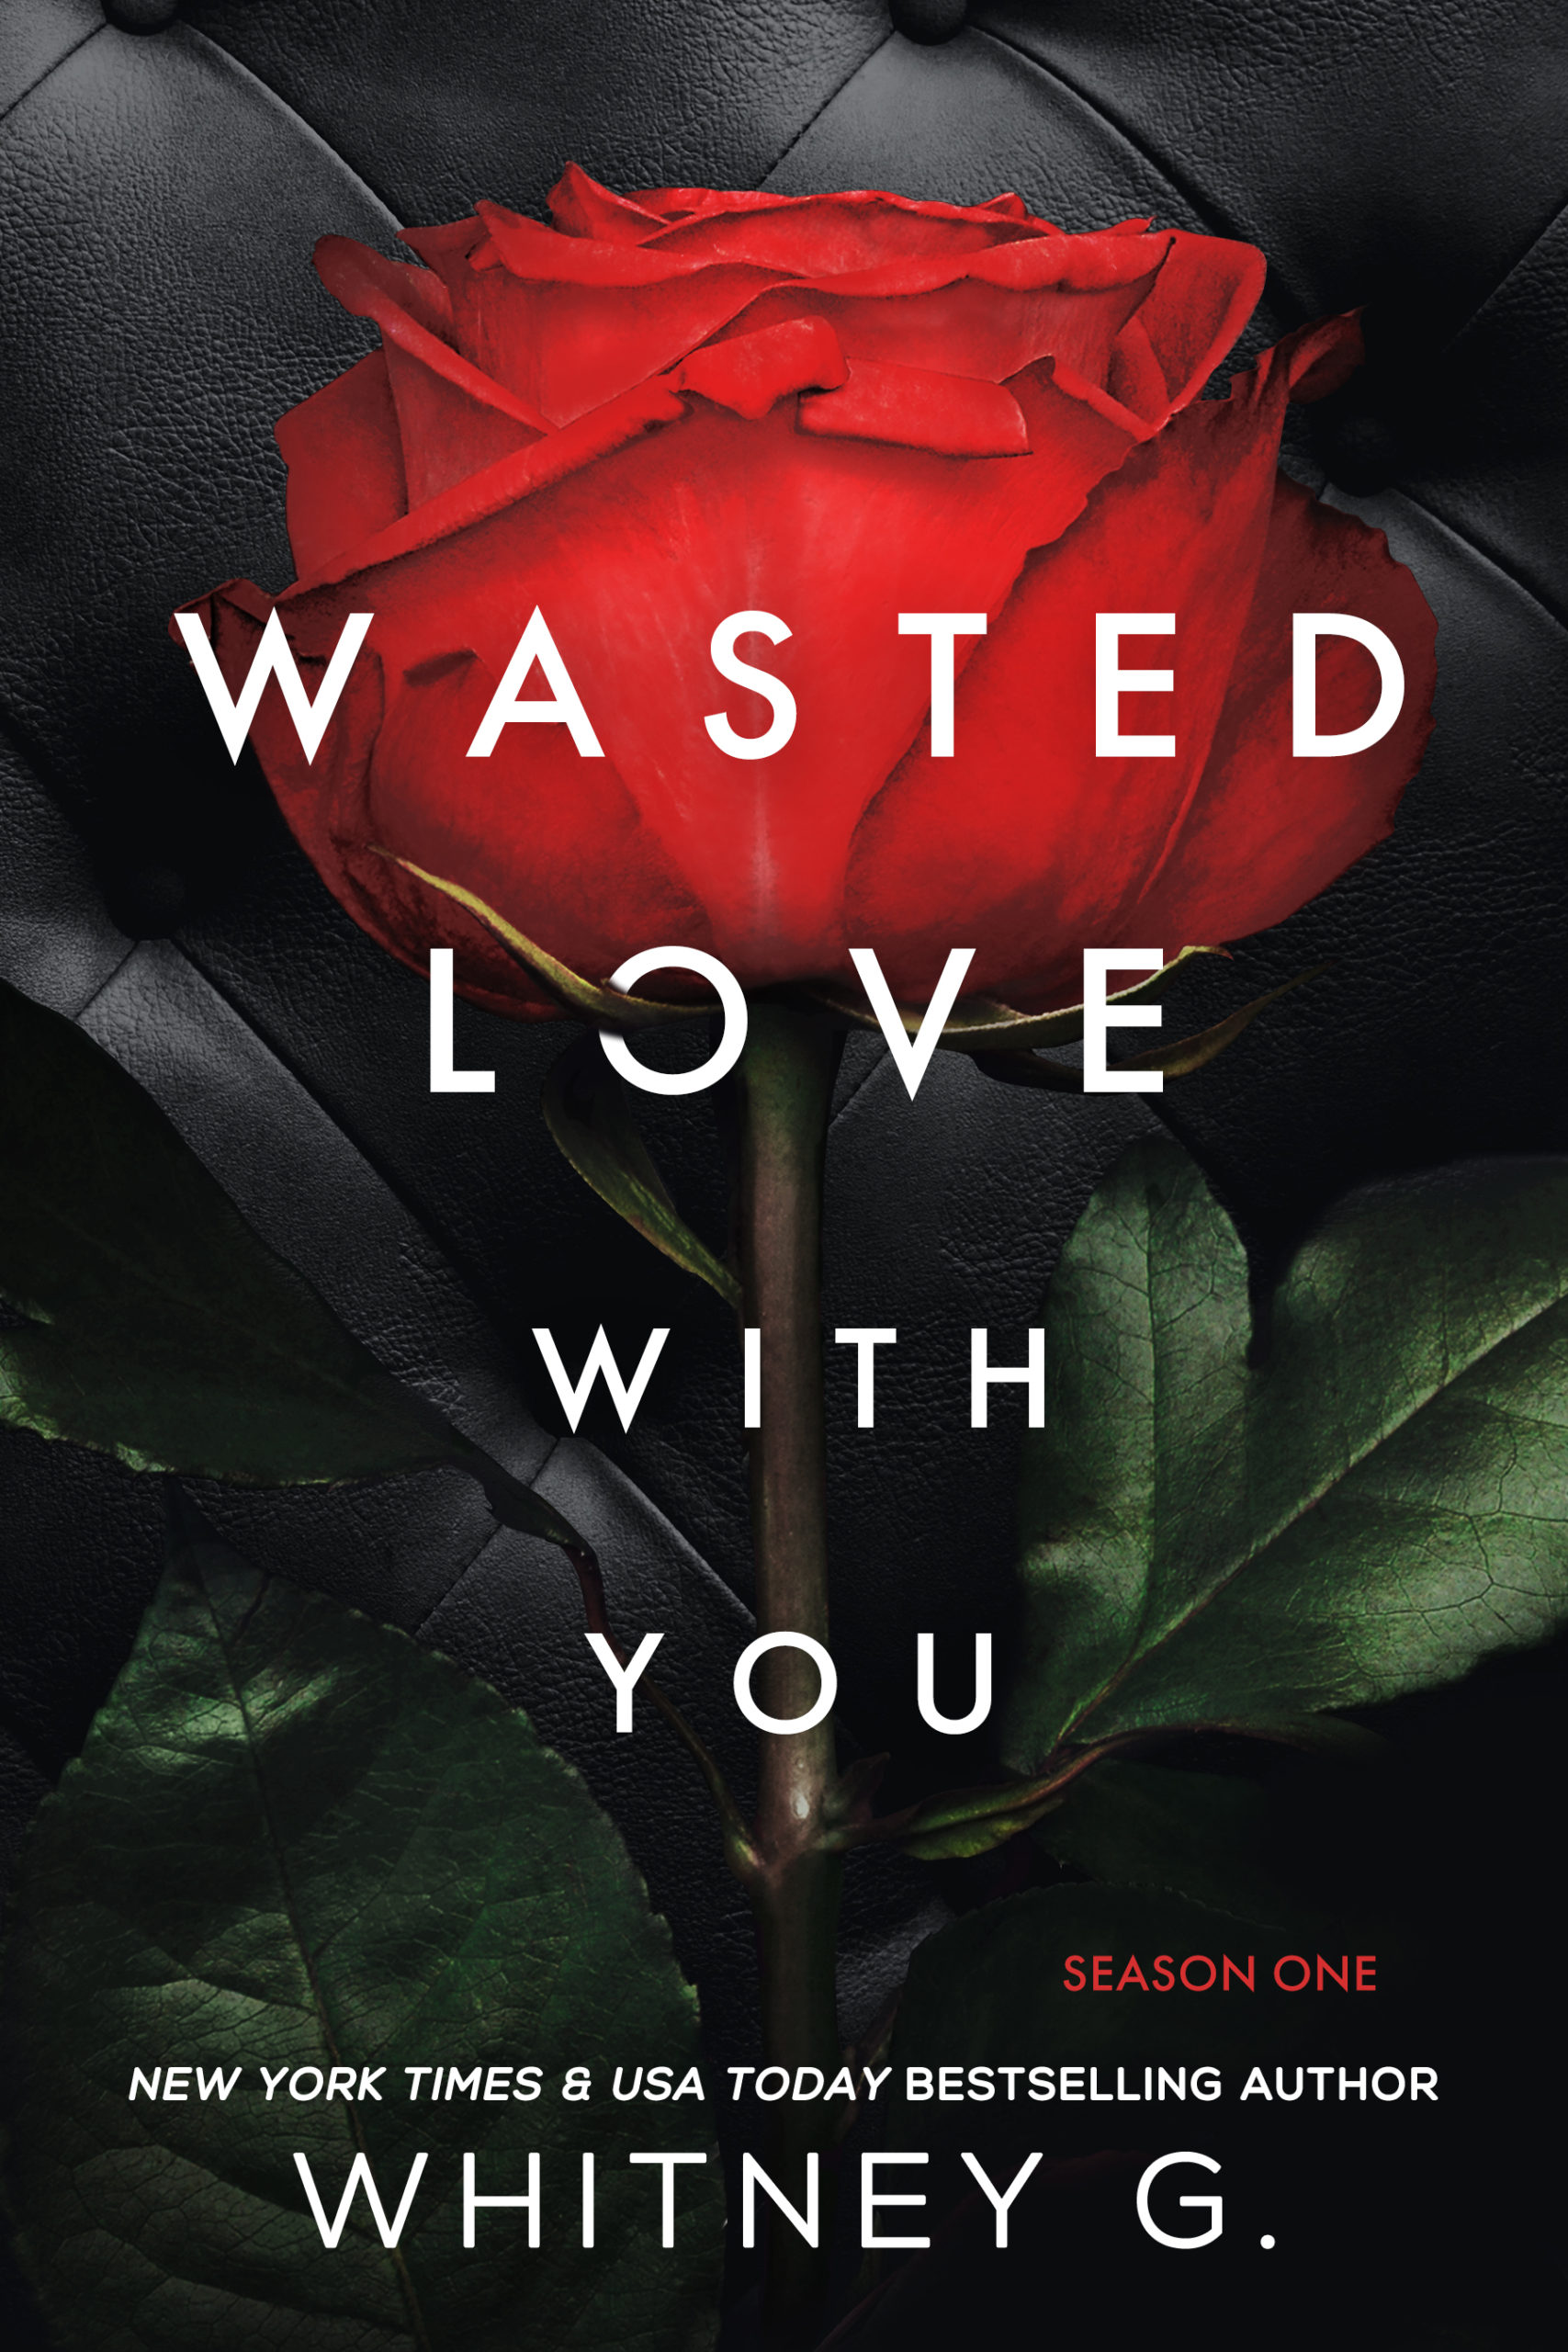 Wasted Love Trilogy Update